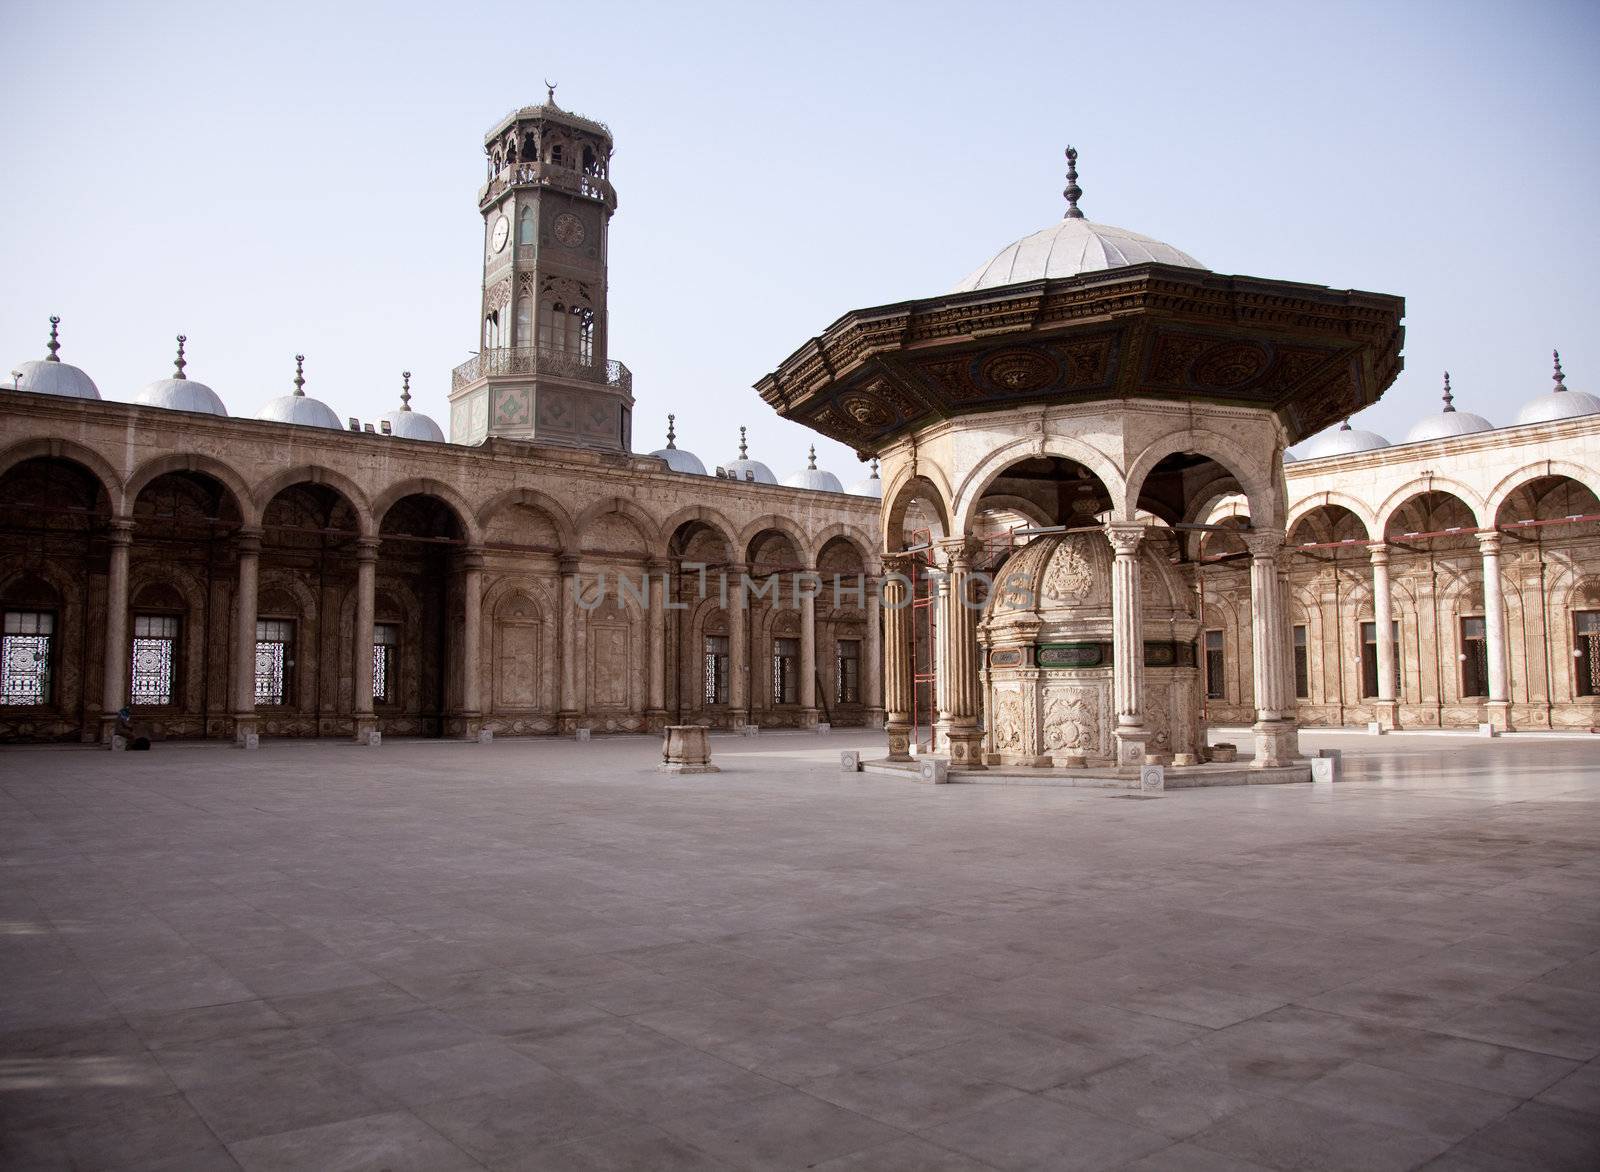 Old mosque in the Citadel in Cairo by steheap